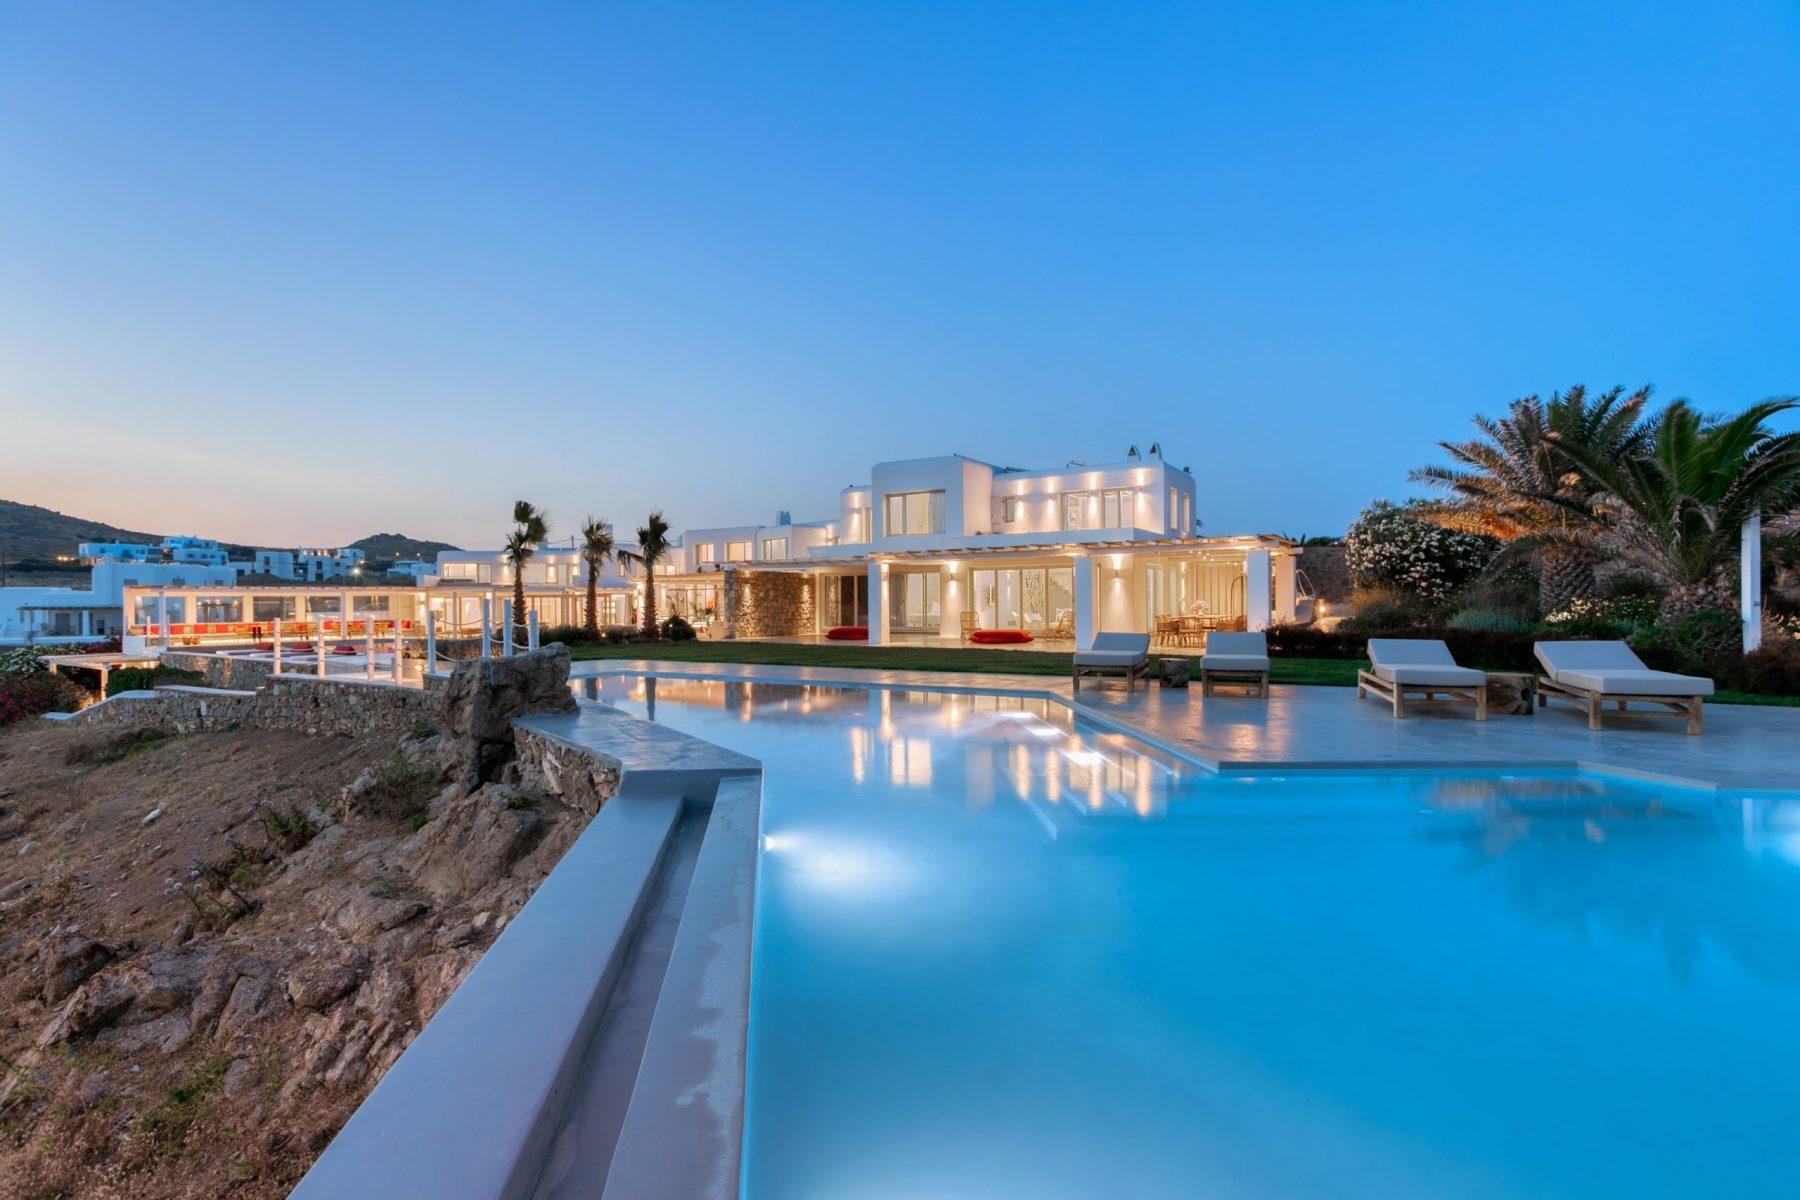 View of Villa Megan in Mykonos at the sunset